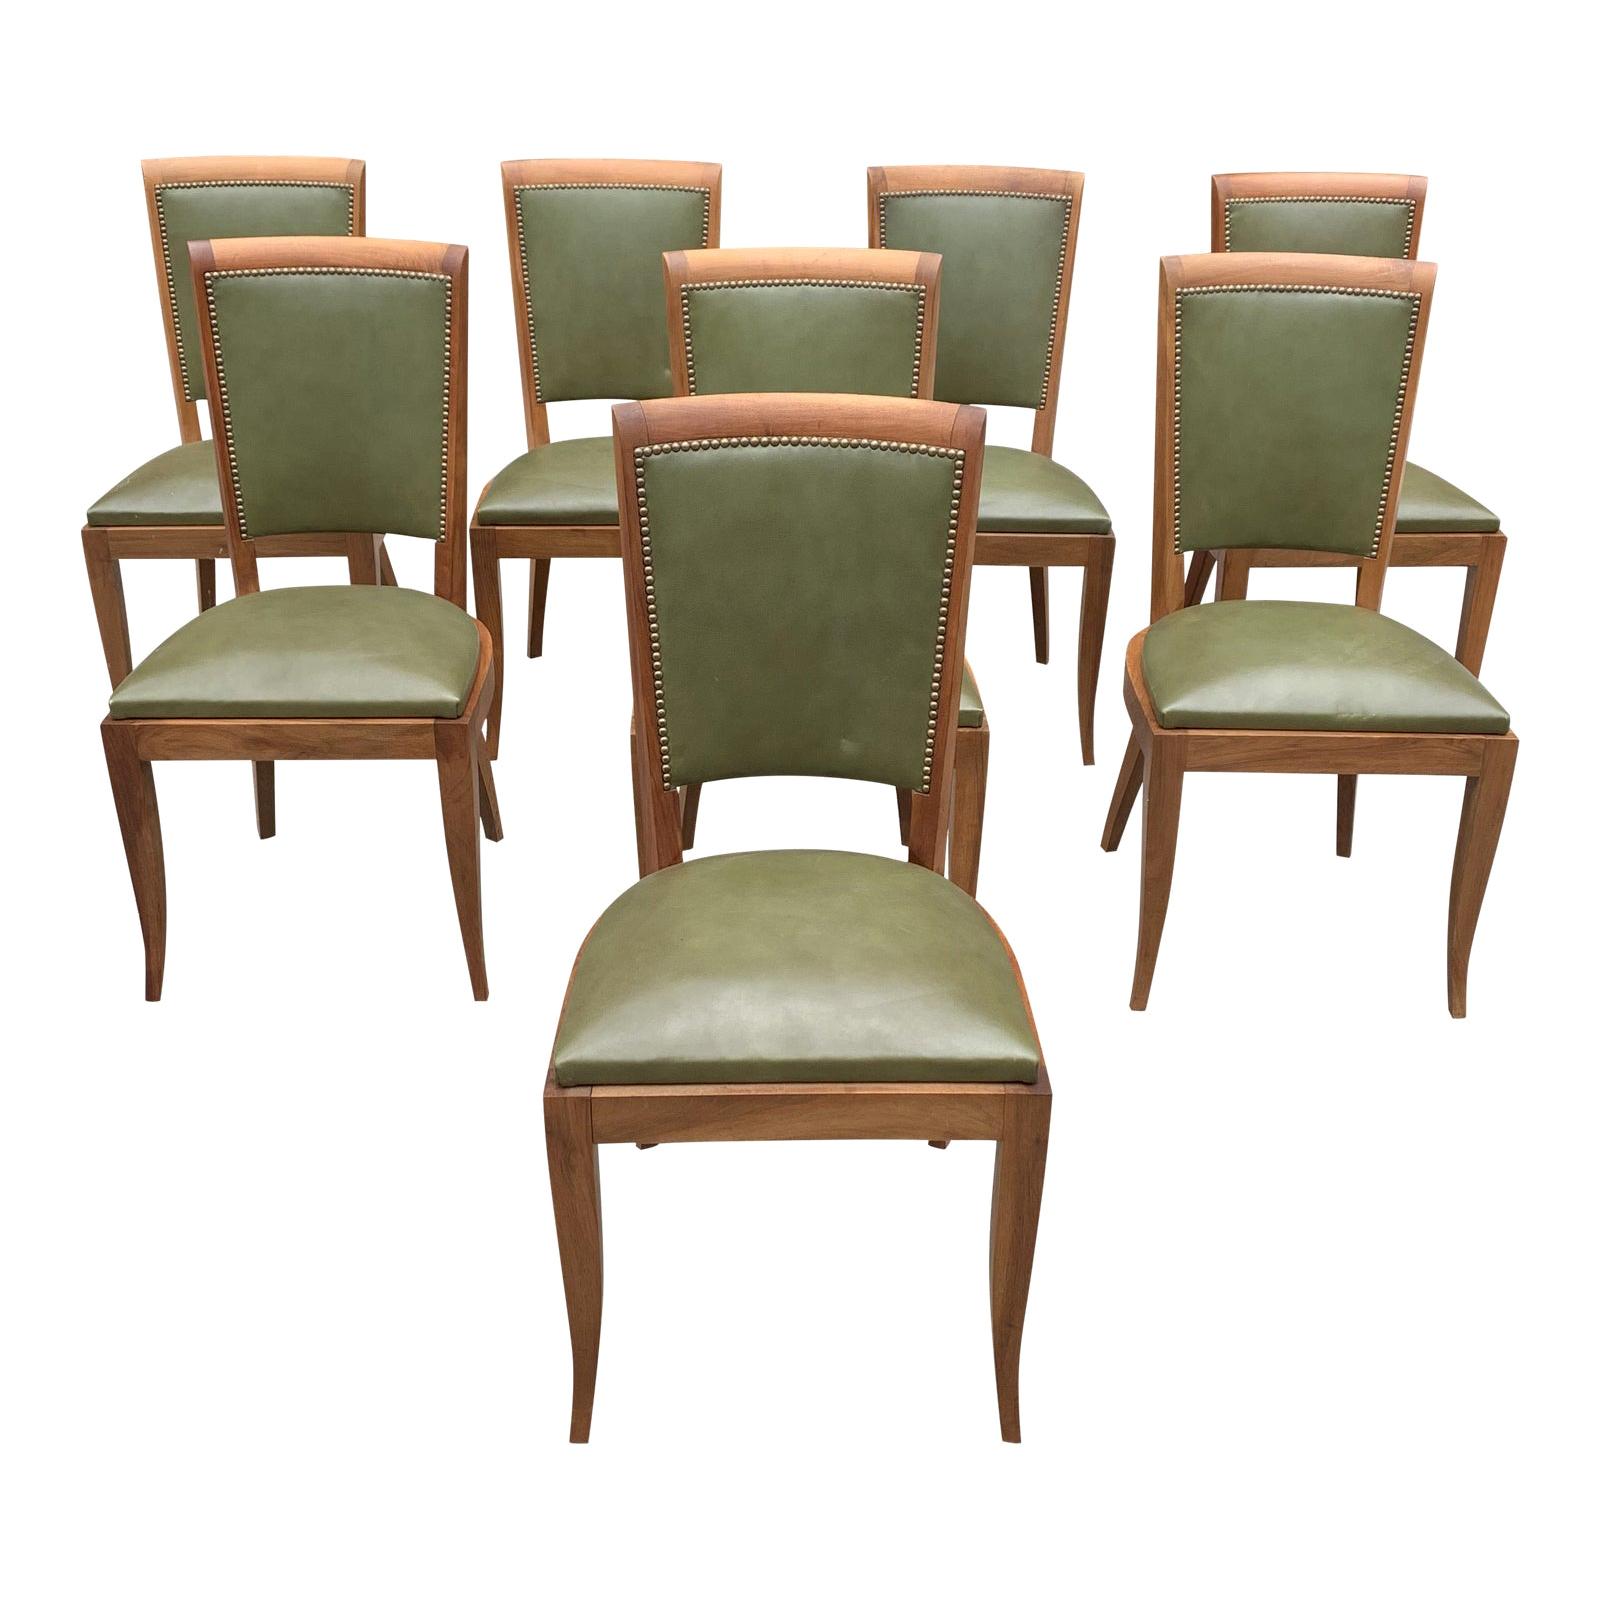 Set of 8 French Art Deco Solid Mahogany Dining Chairs, 1940s For Sale